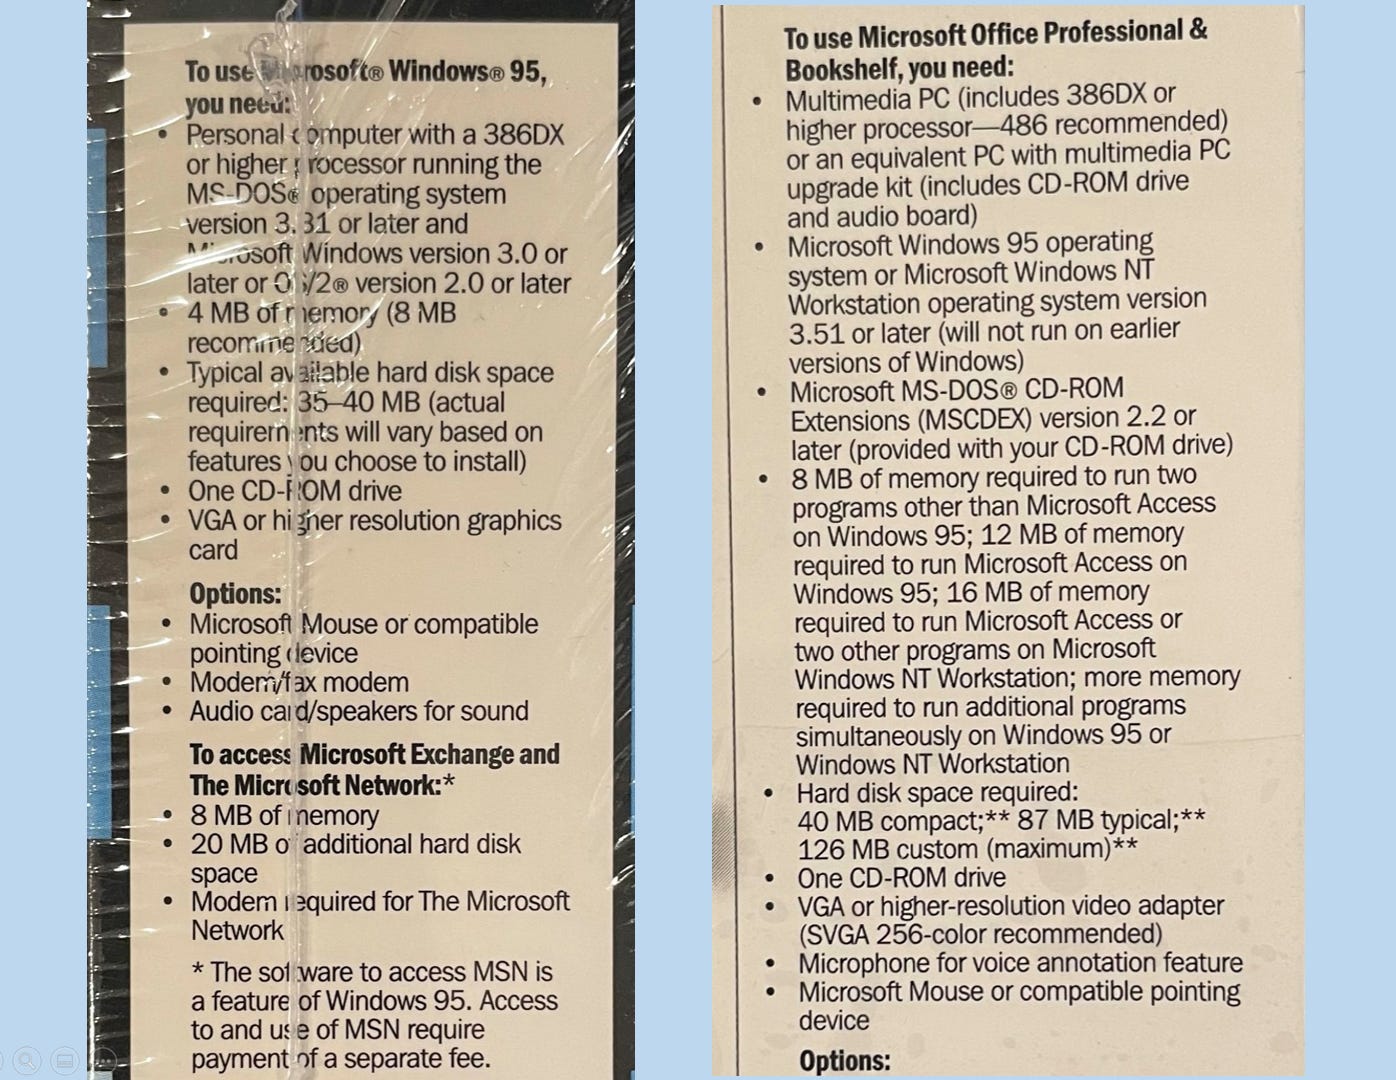 The final system requirements as photographed on the box. Windows says 4MB (8MB recommended) and Office says 8MB to run two programs other than access, 12MB required for Access, 16MB required to run access and two other programs.